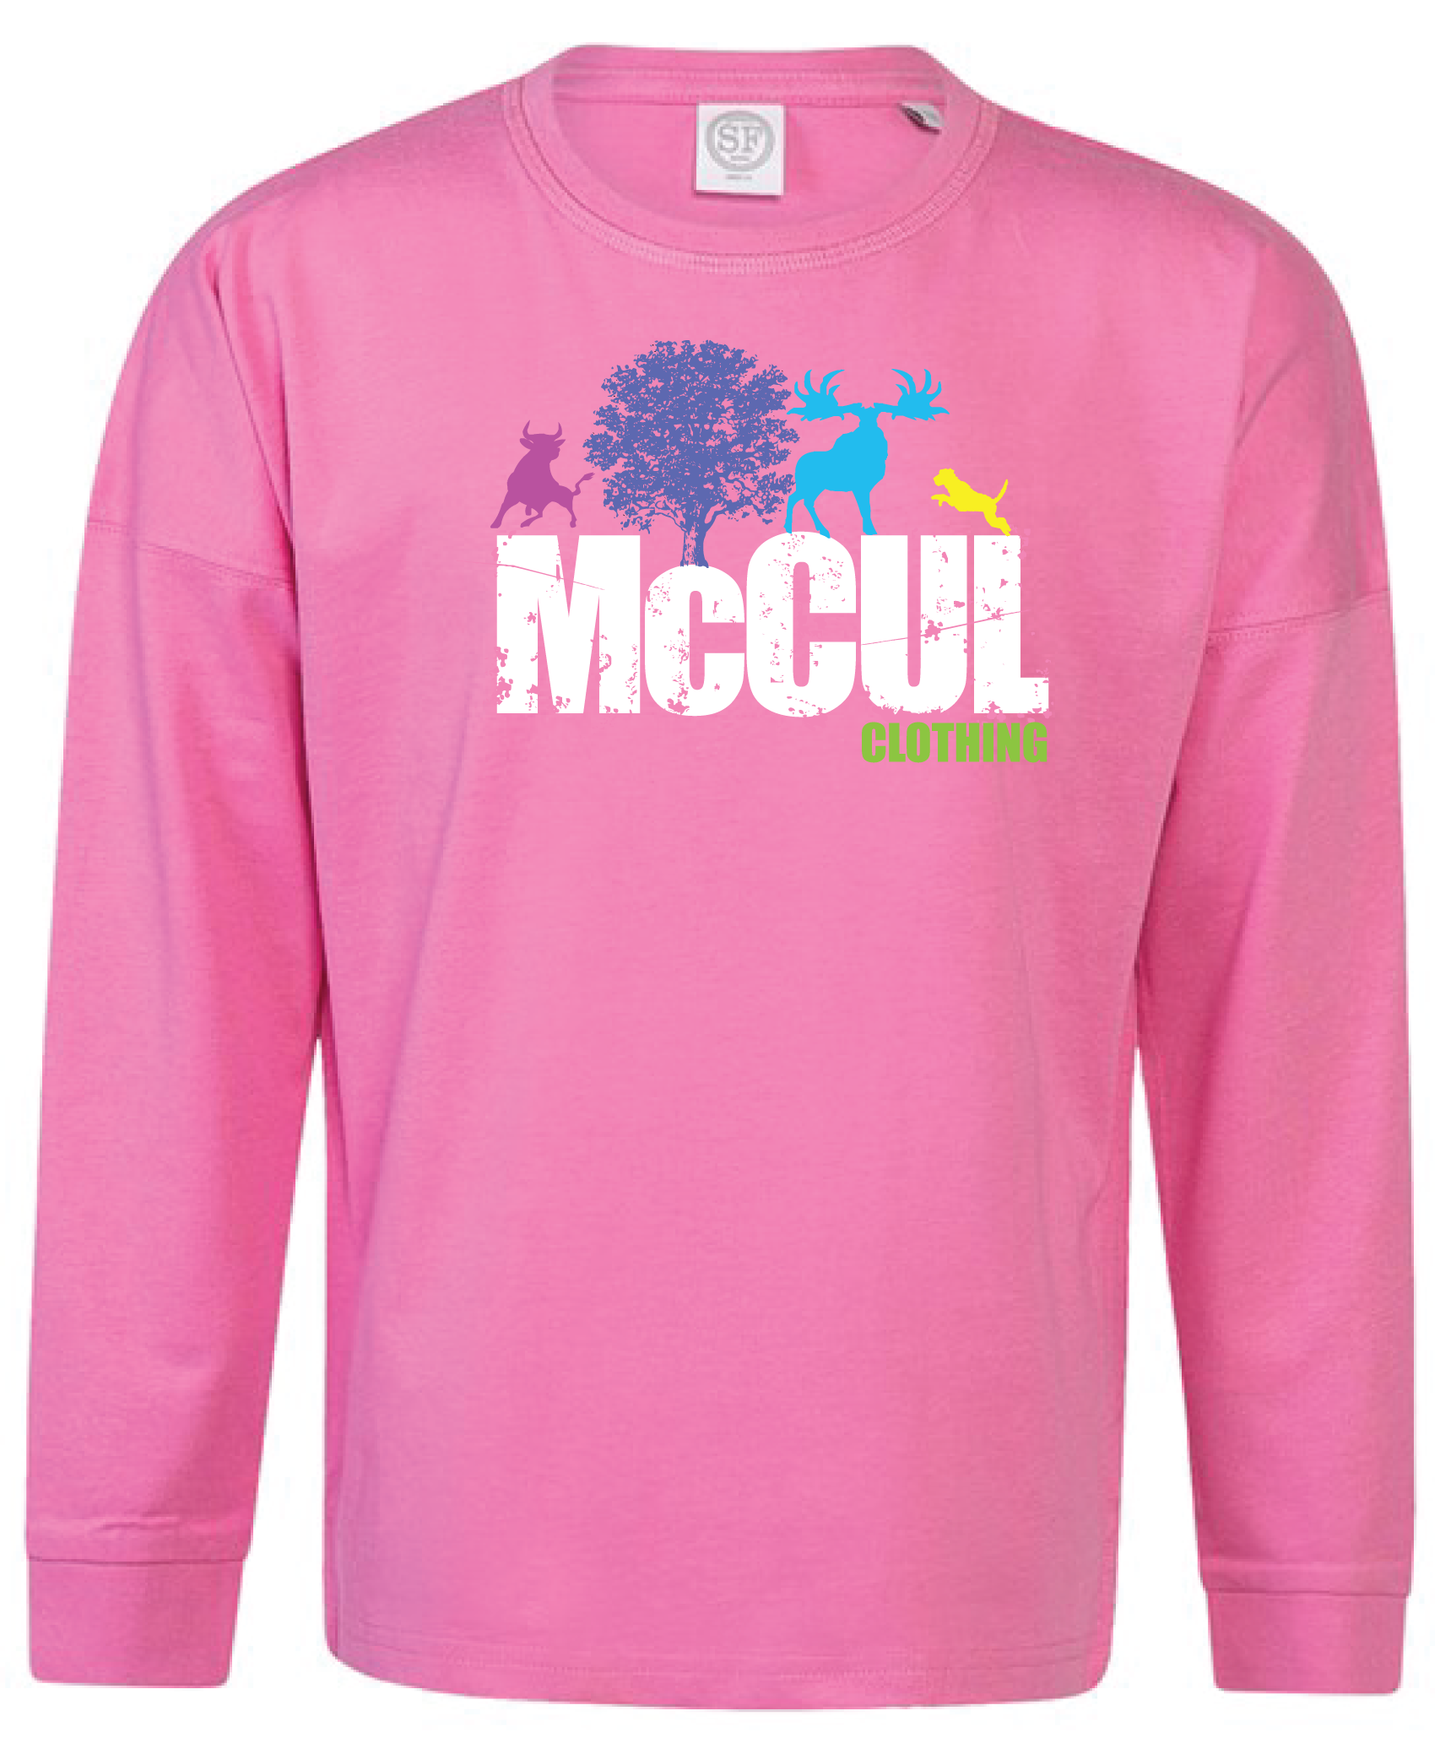 Girls Pink 100% Cotton  long sleeve top with McCul multi colour print